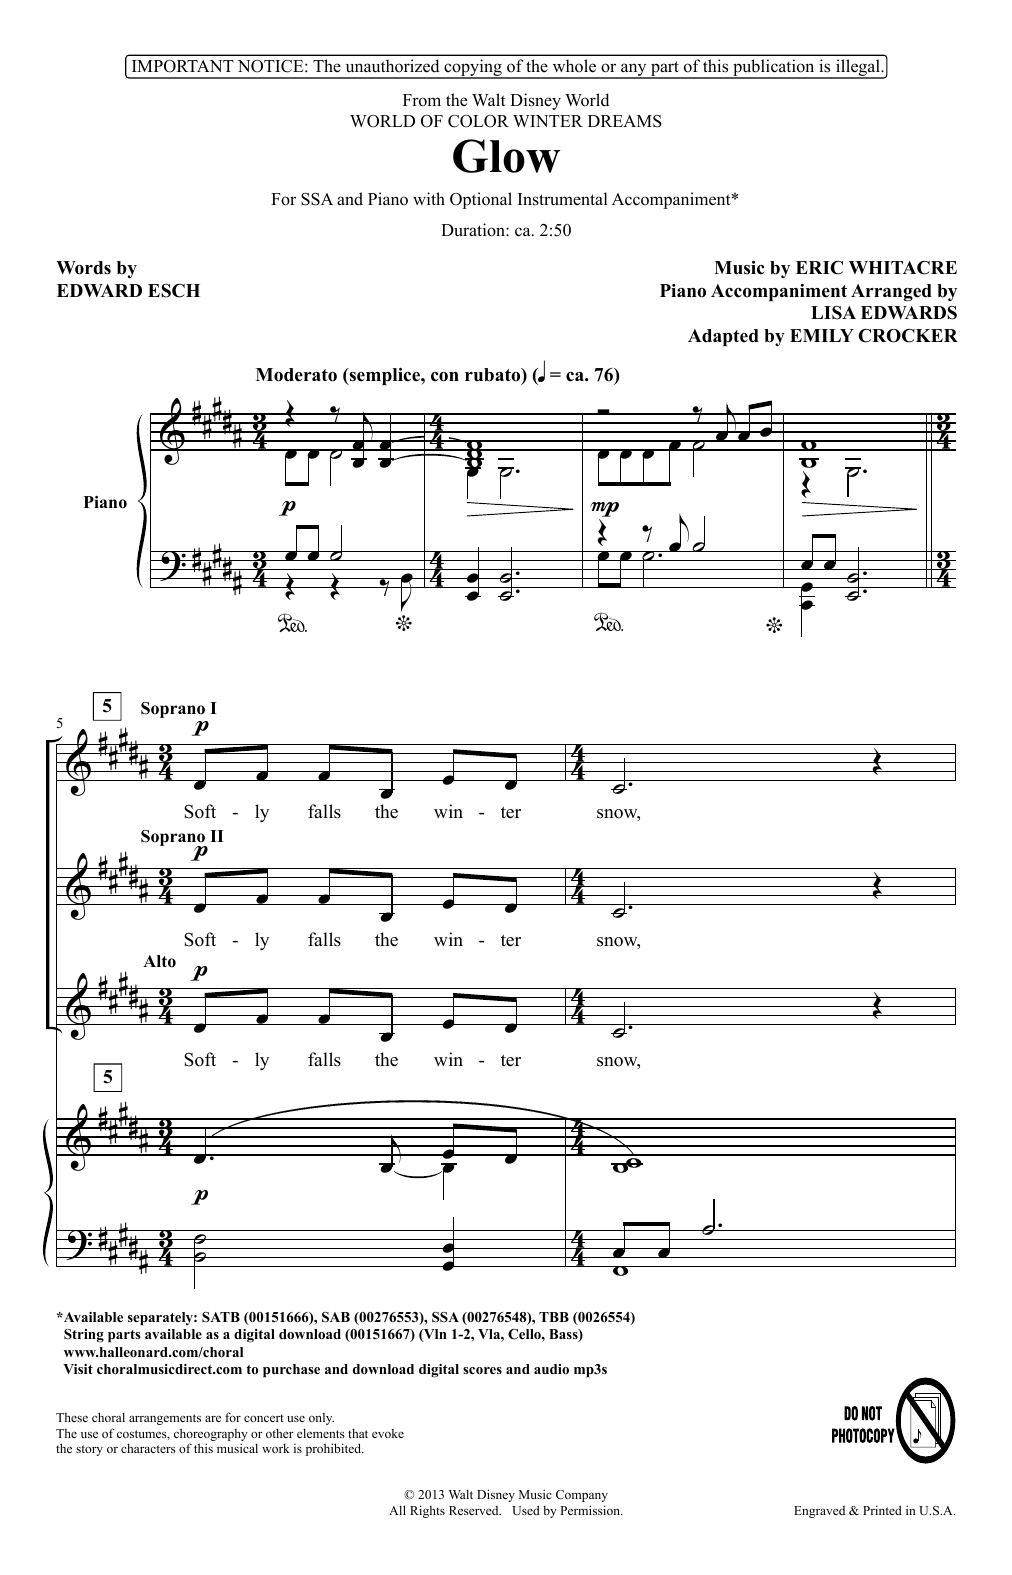 Eric Whitacre Glow (arr. Emily Crocker) sheet music notes and chords. Download Printable PDF.